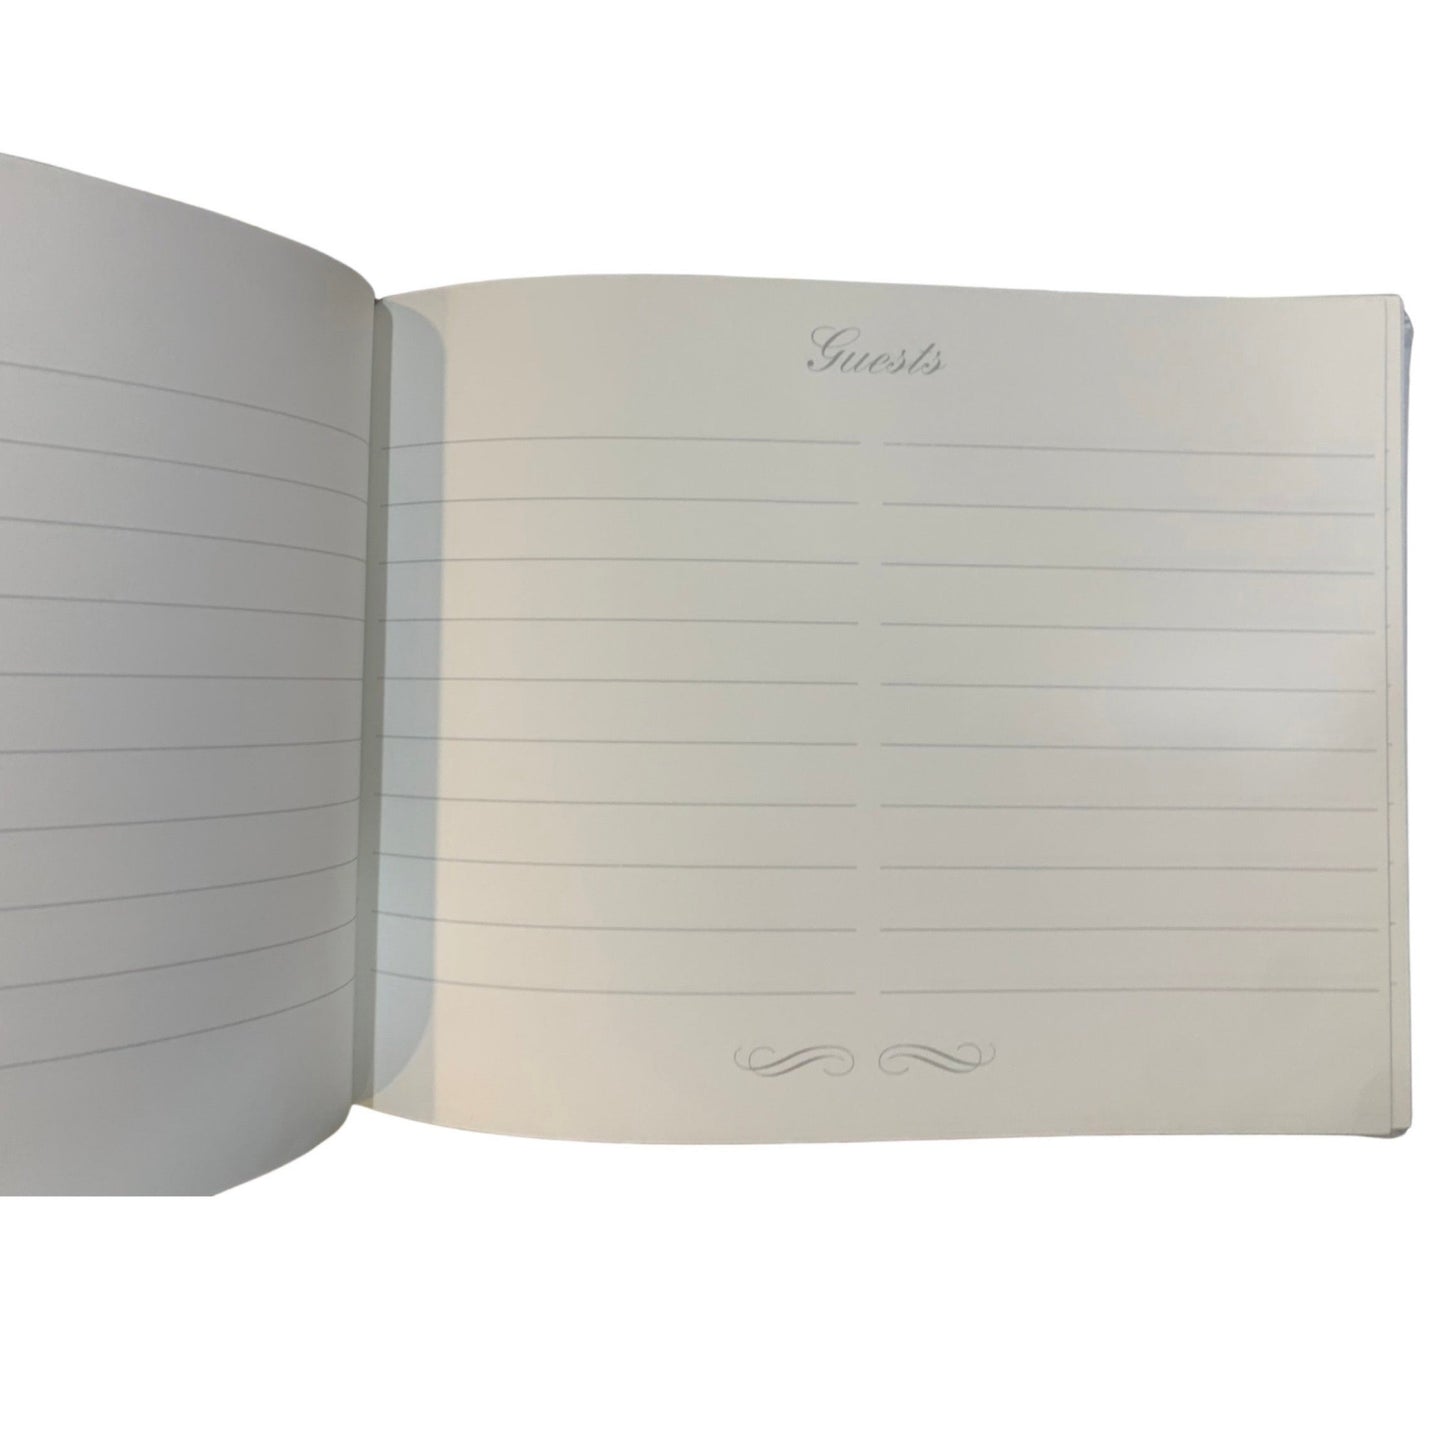 Classic White Leather Wedding Guest Book | 7 by 9 Inches Horizontal | Buffalo Embossed Calf Leather | GUESTS